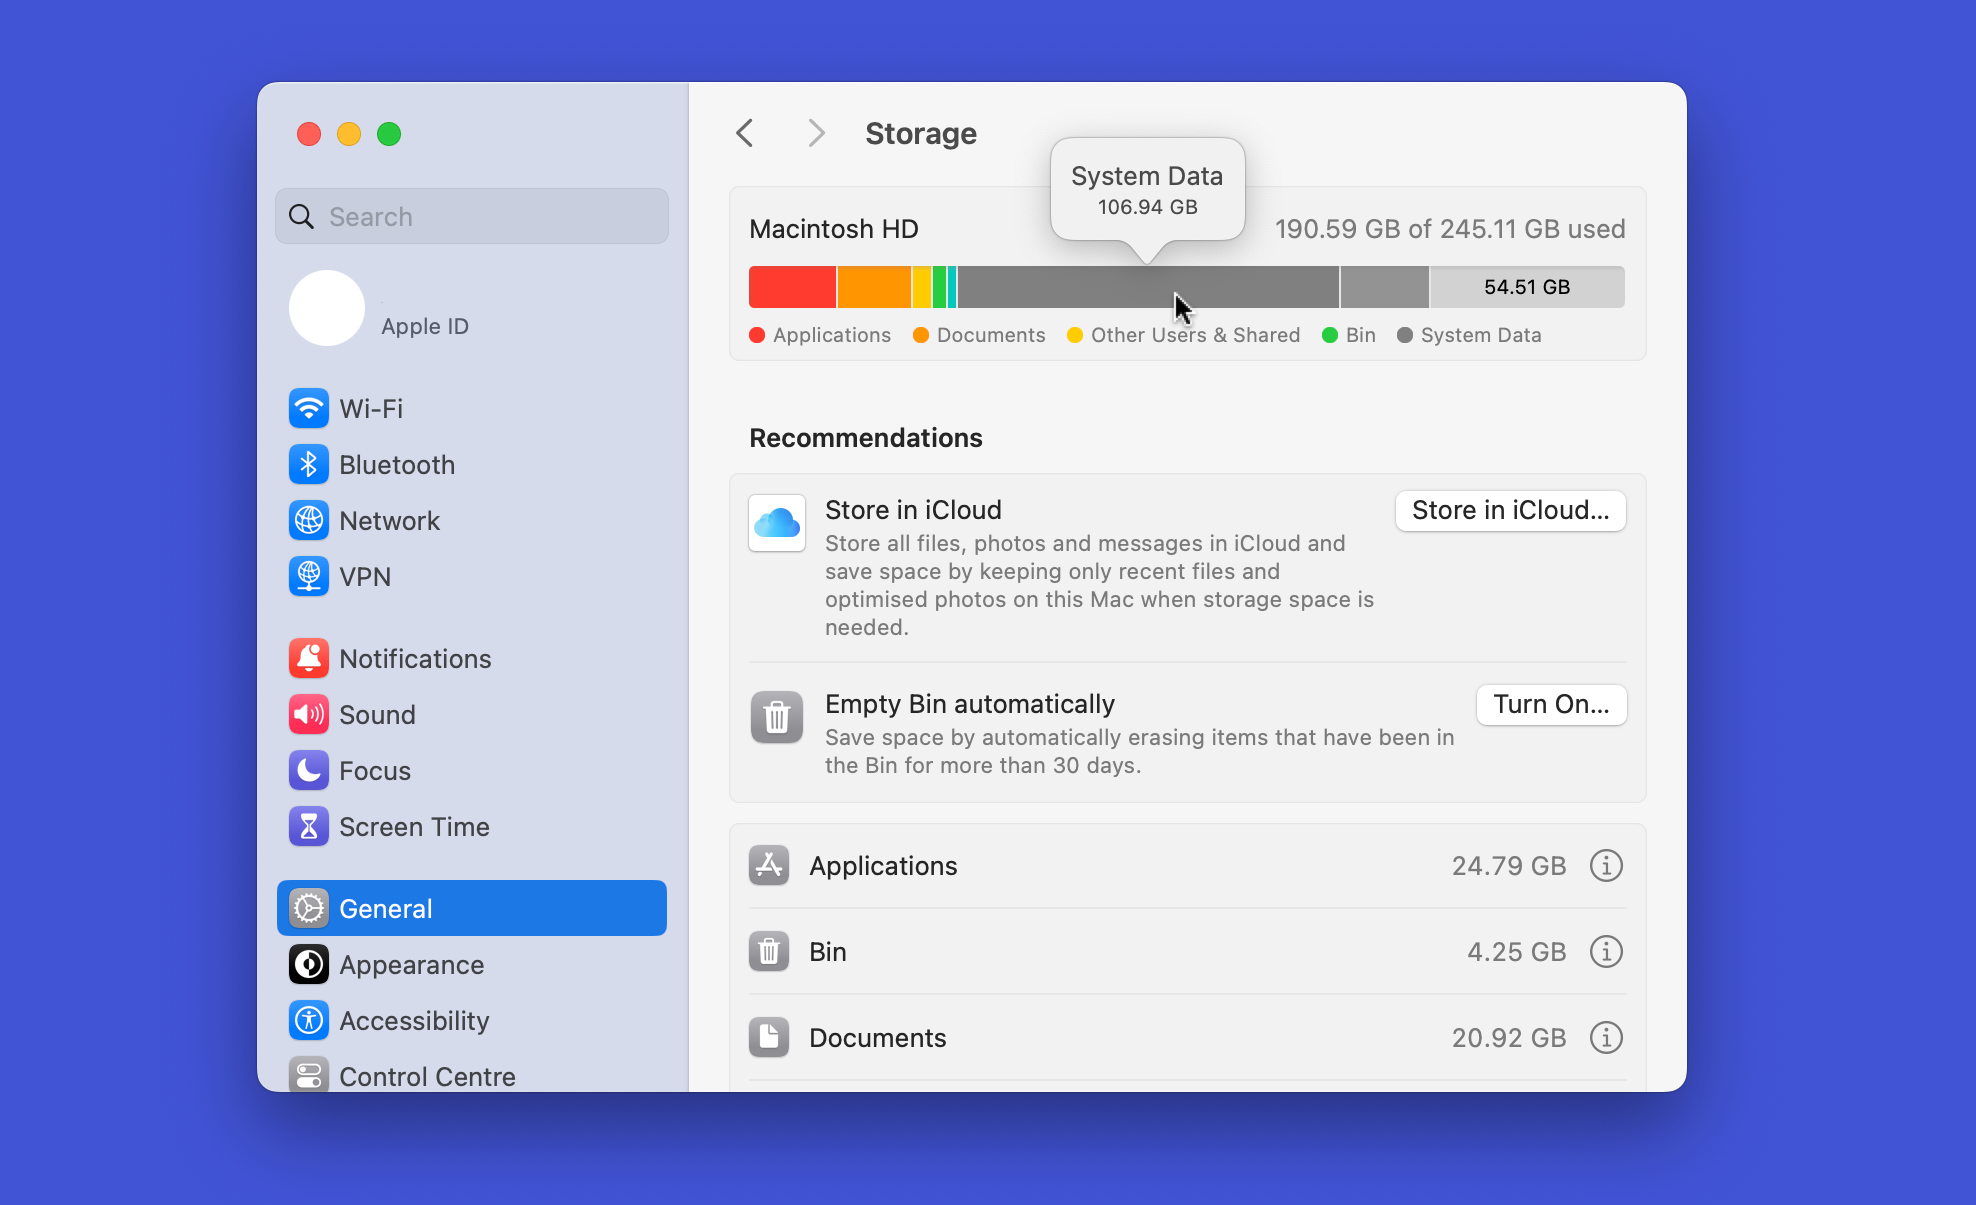 macOS System Settings showing a breakdown of how storage is being used.